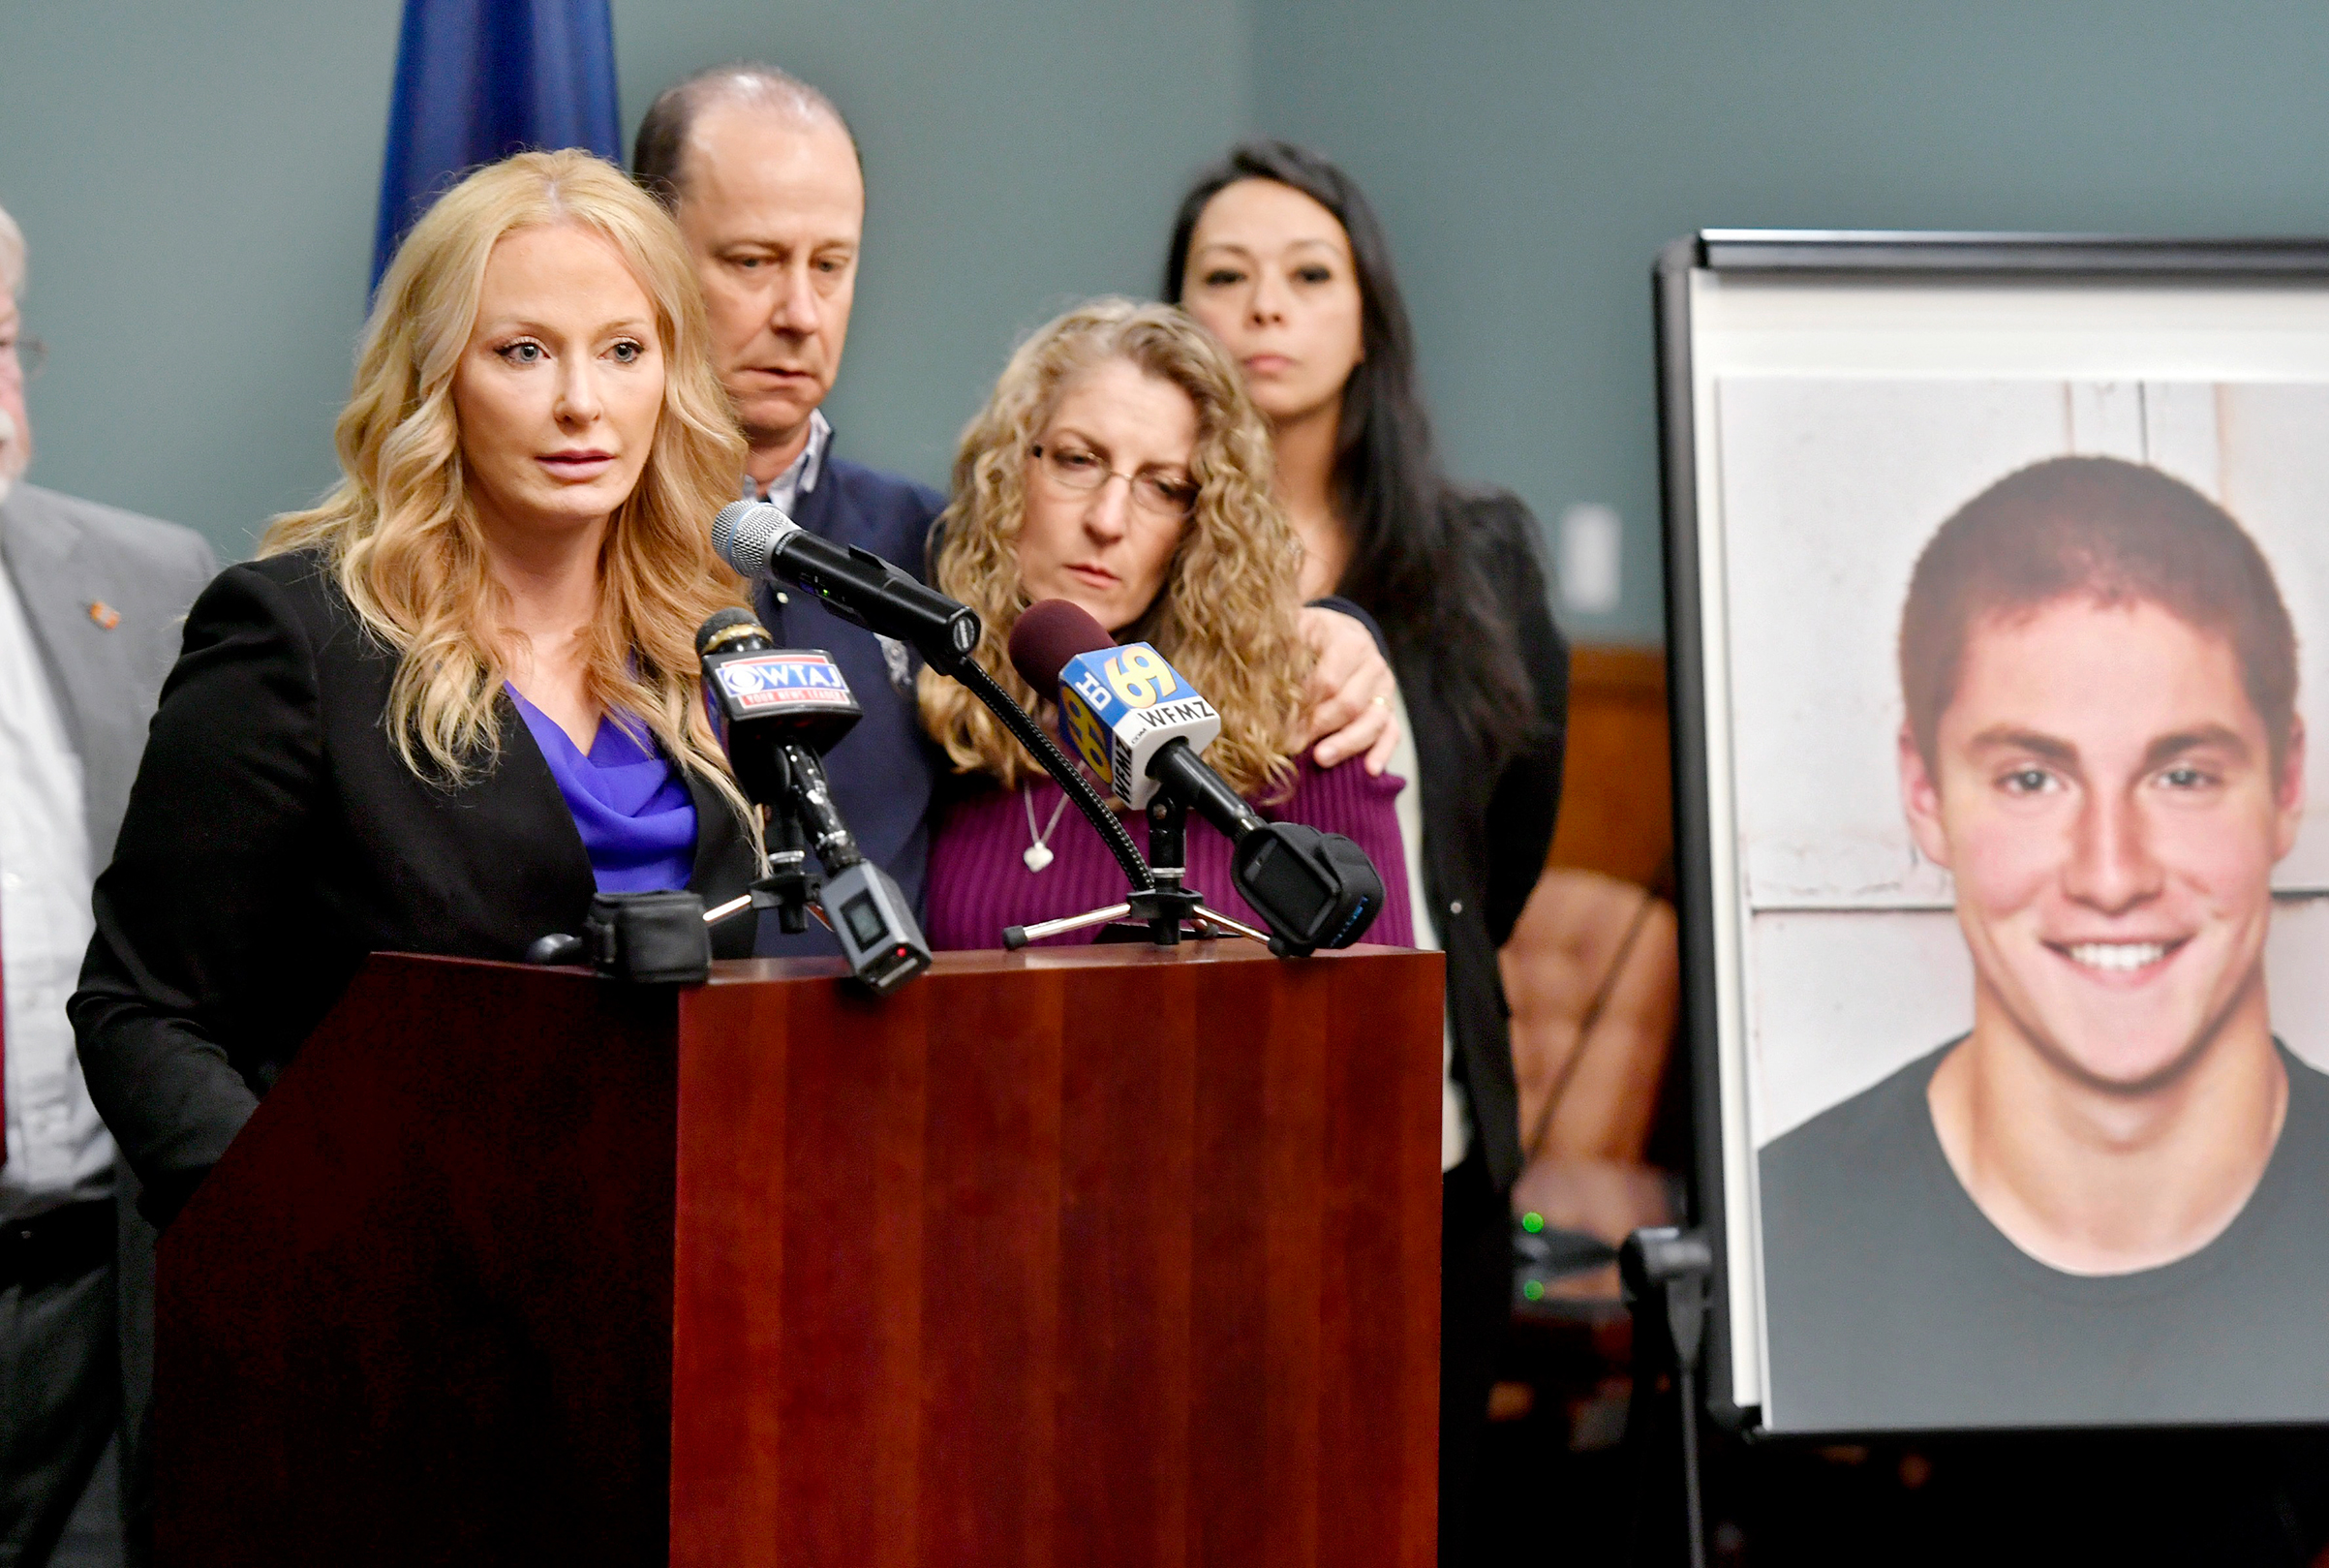 Centre County District Attorney Stacy Parks Miller, left, stands with Tim Piazza’s parents on May 5 to announce the results of an investigation into his death (Abby Drey—Centre Daily Times/AP)